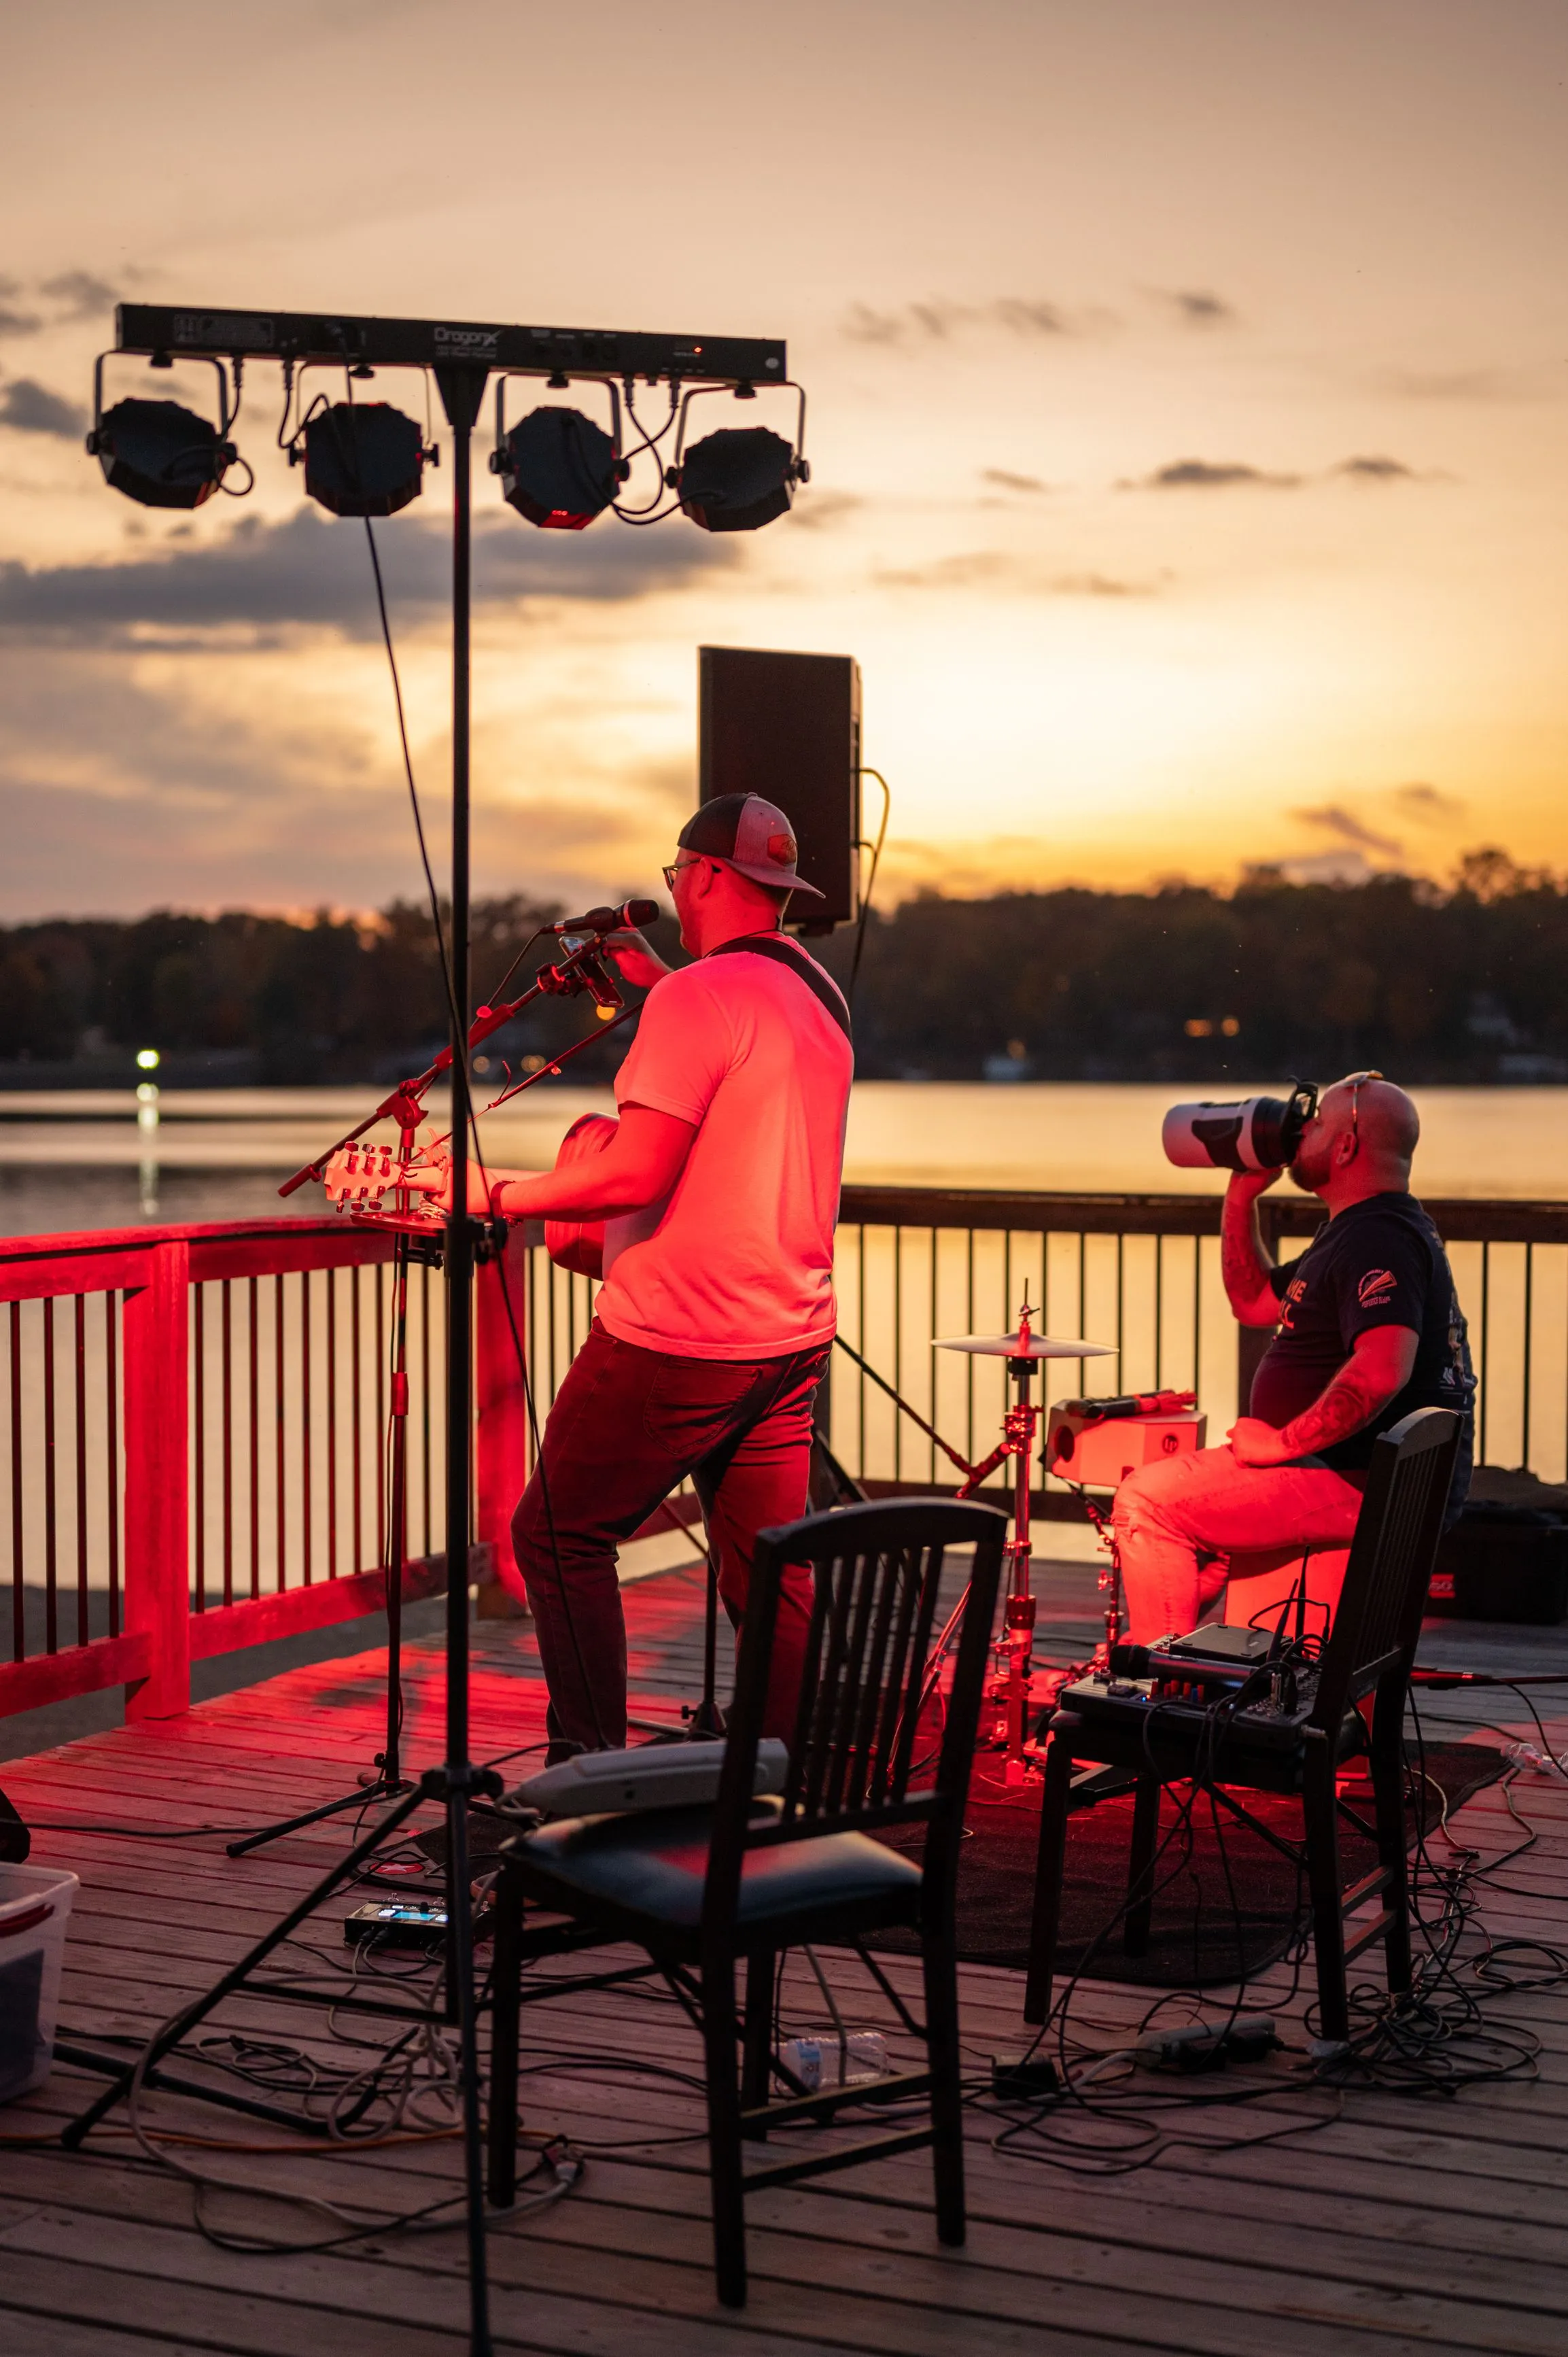 Musicians performing on an outdoor stage by a lake at sunset.